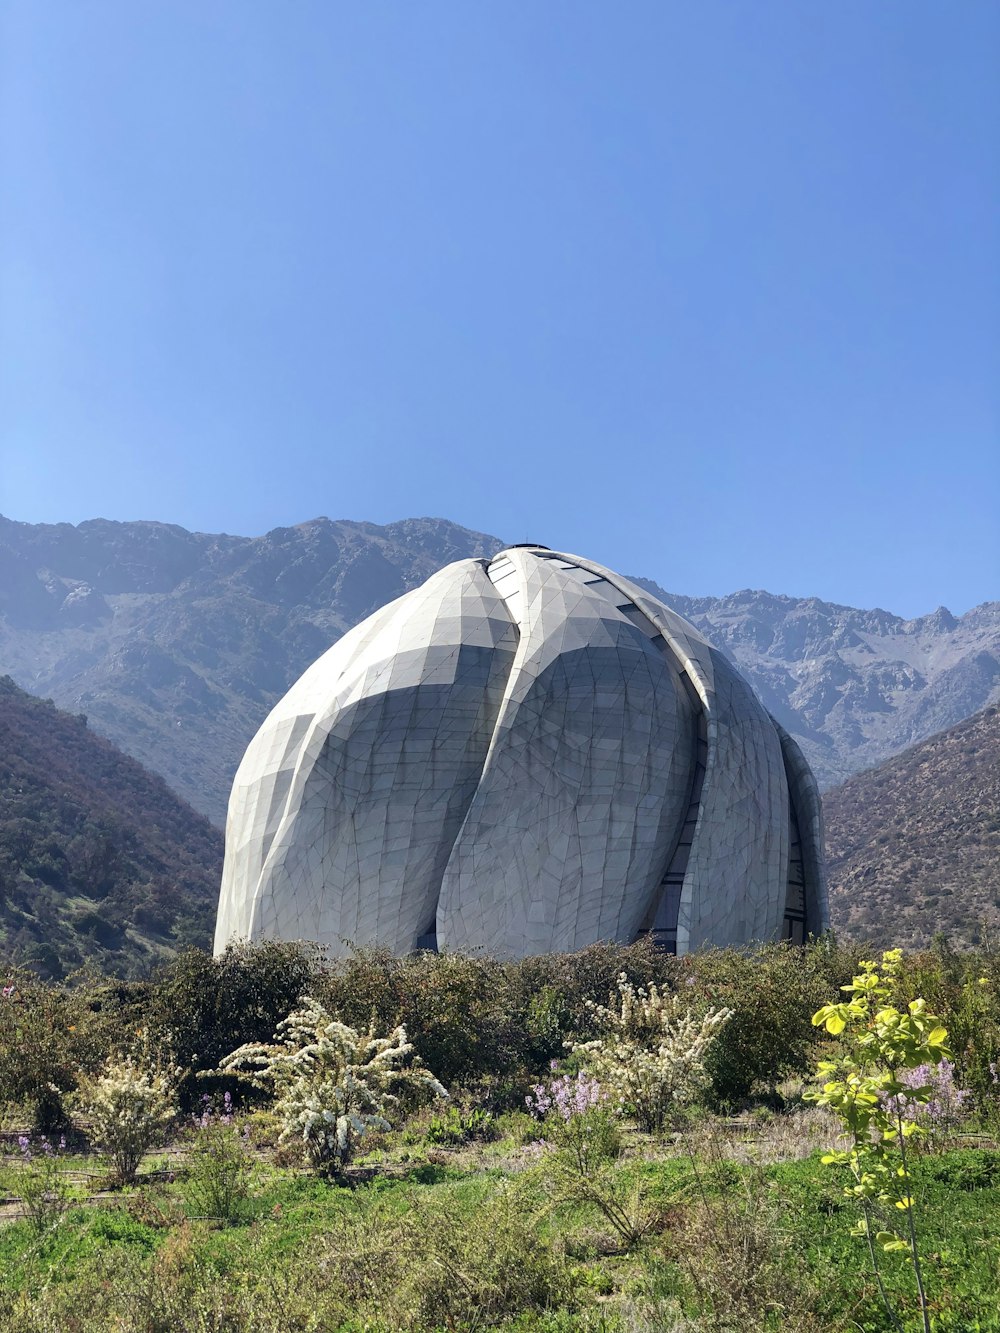 white dome structure near green field viewing mountain during daytime